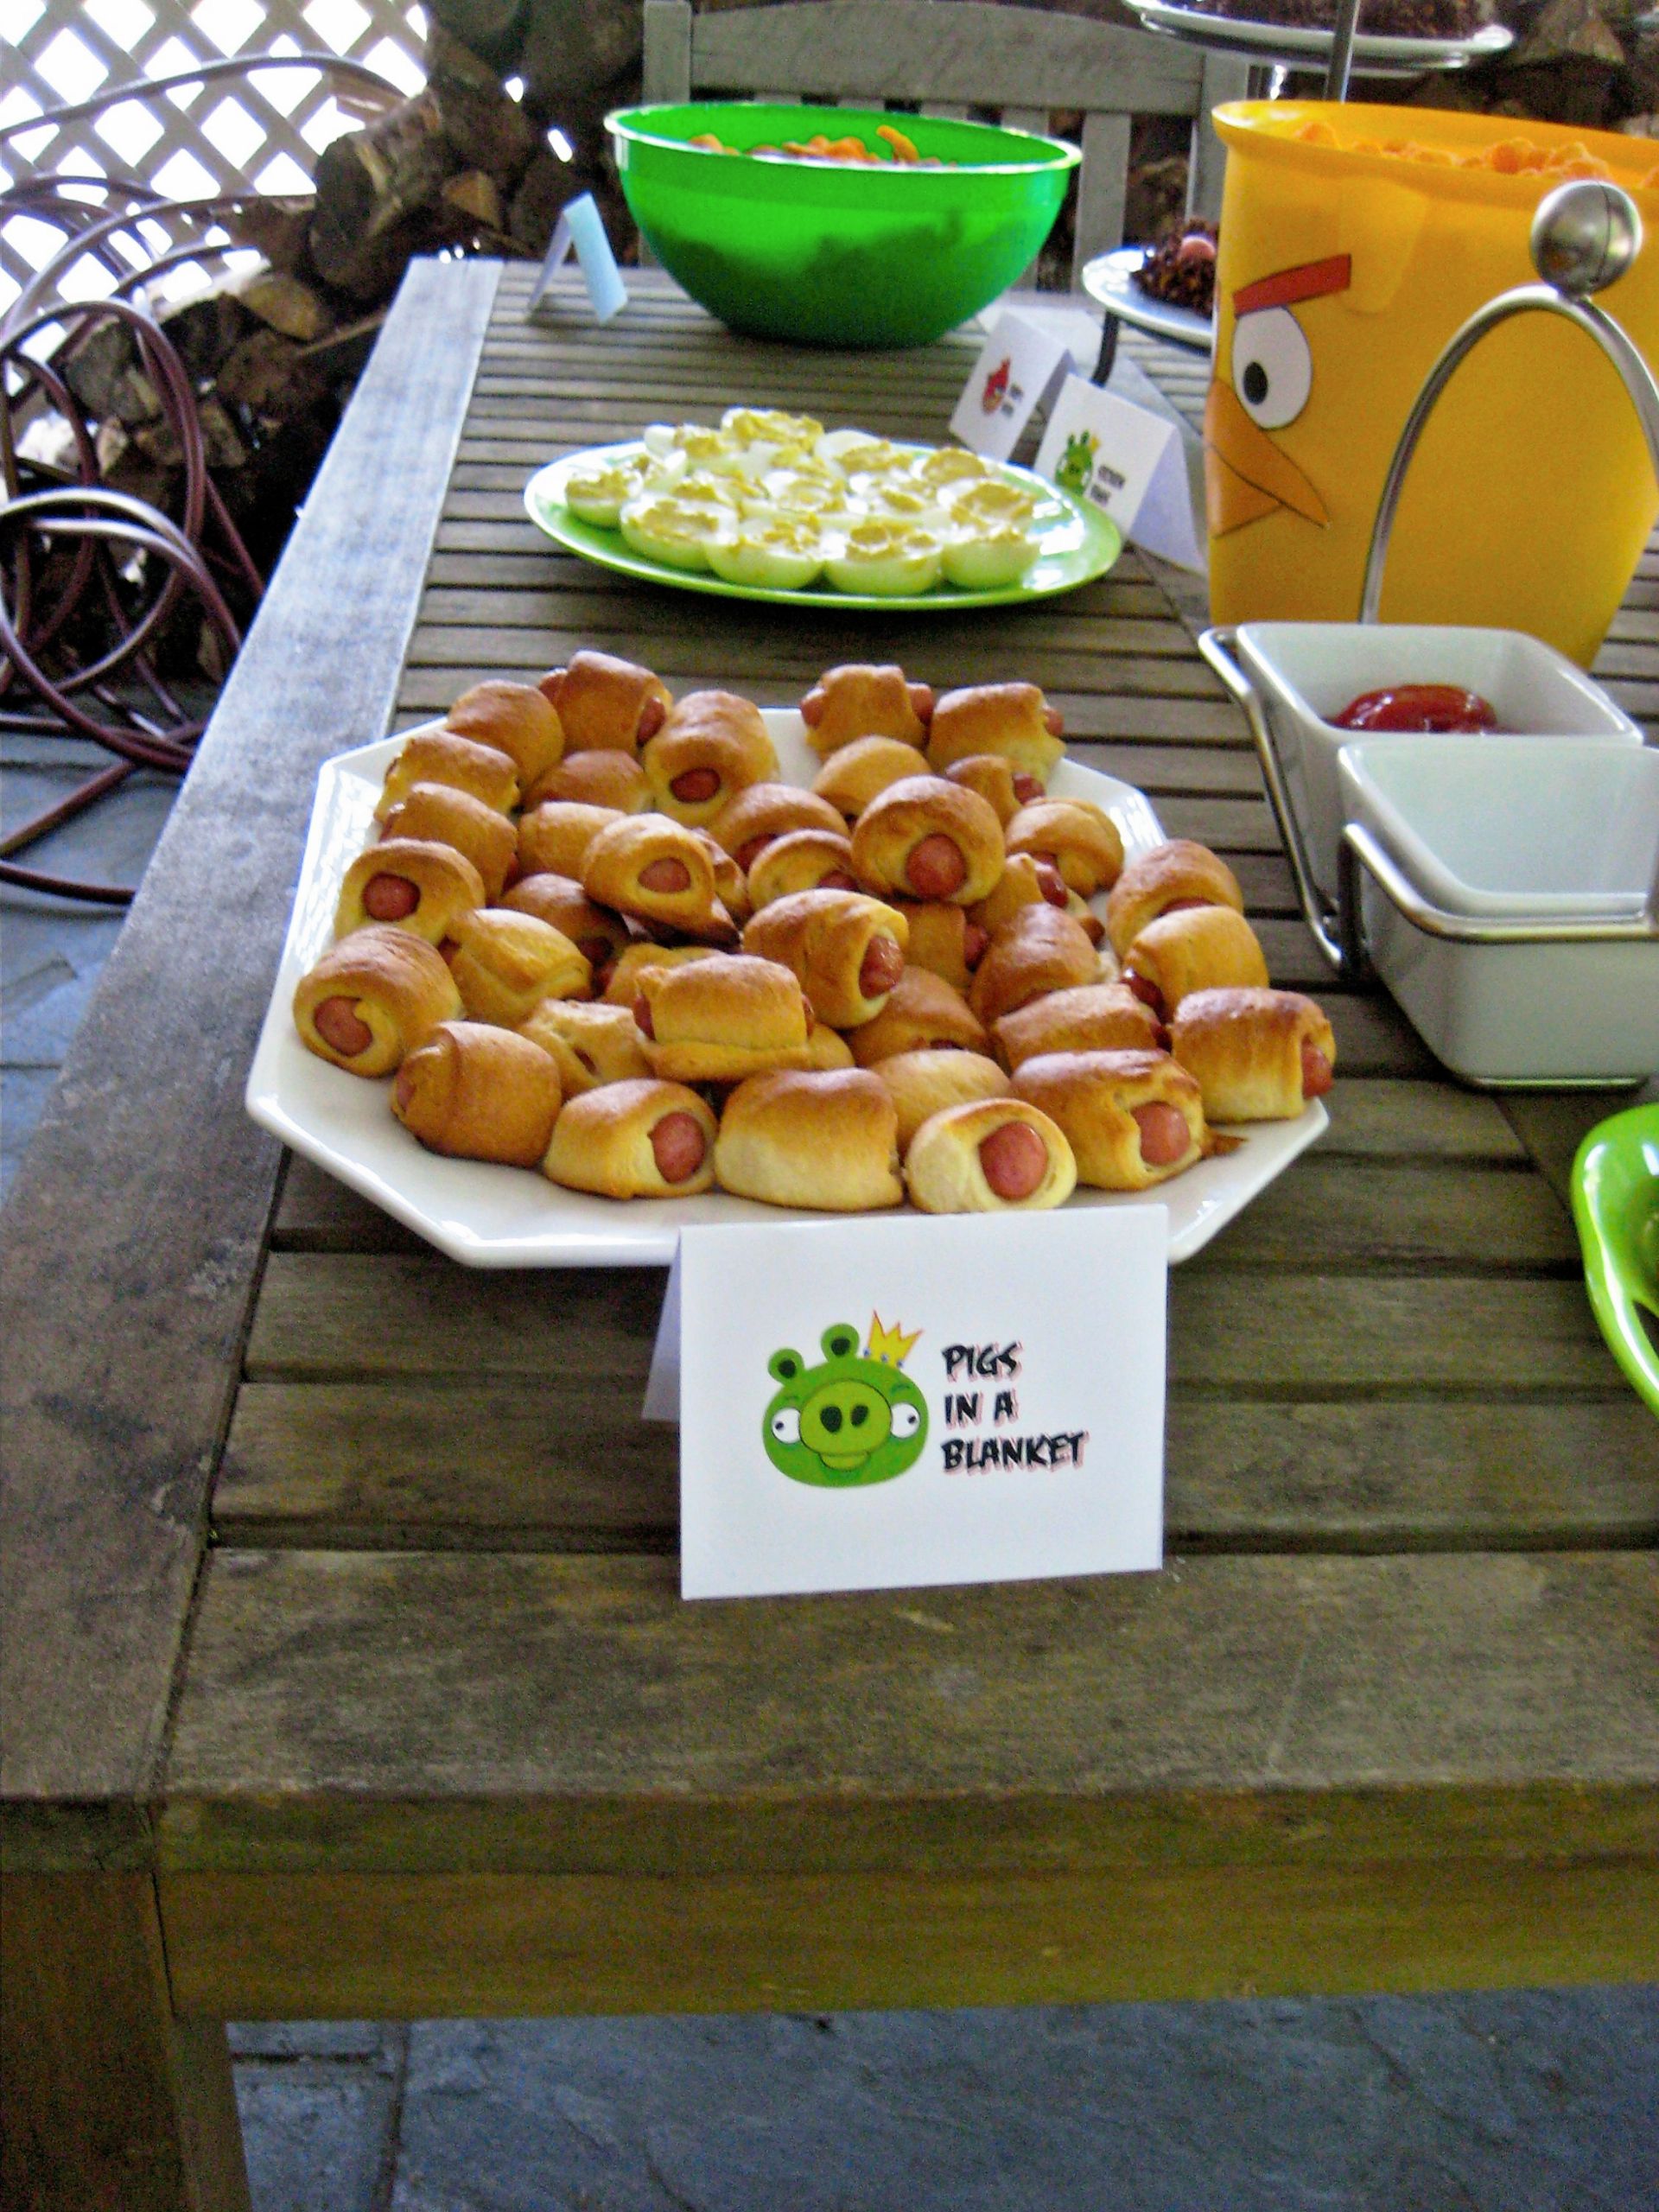 Angry Birds Party Food Ideas
 Angry Birds Splash Party